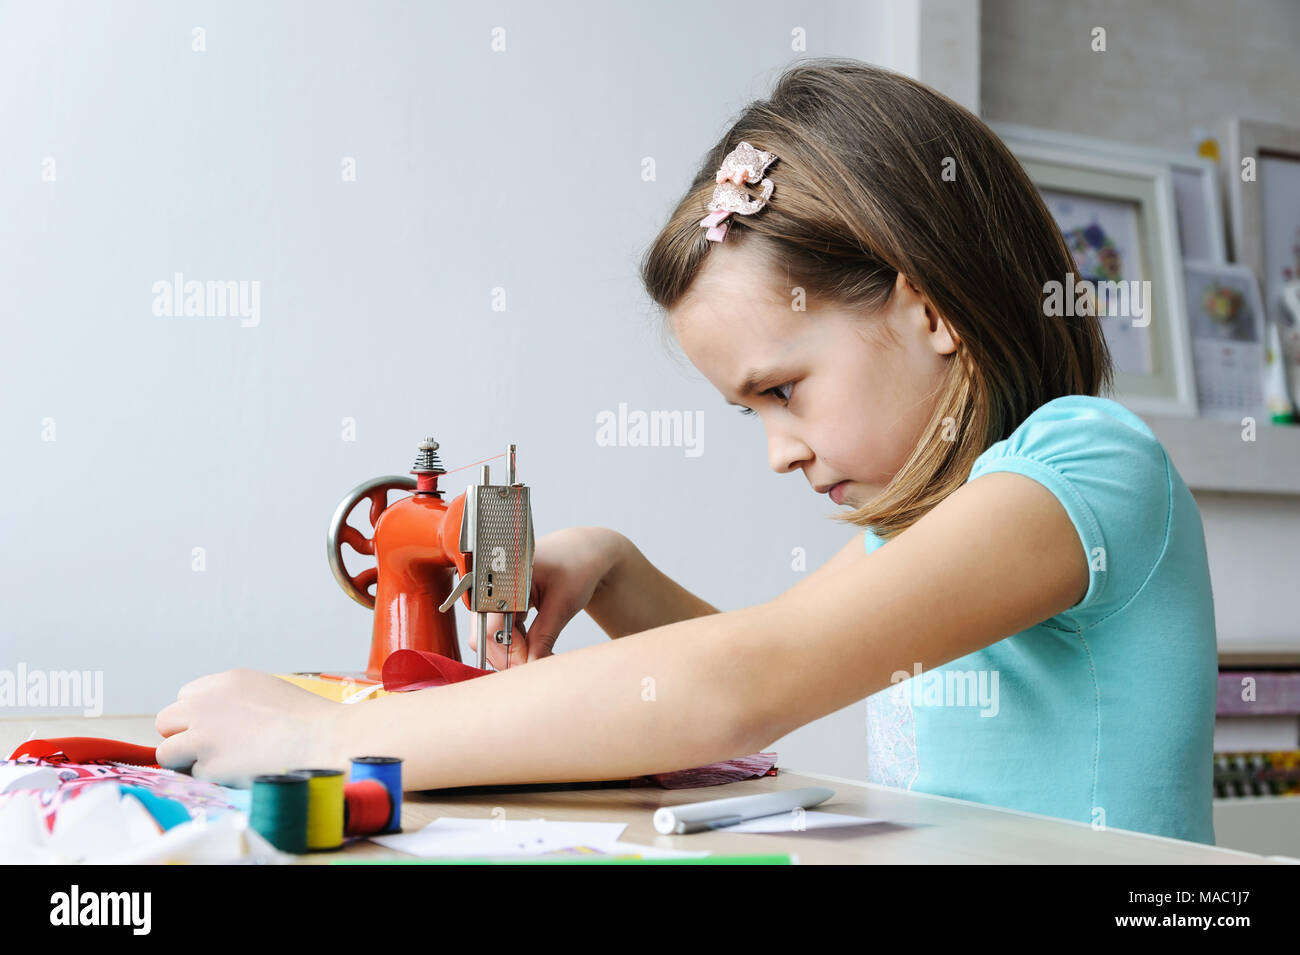 The girl is sitting at the table and sewing on a sewing machine. Stock Photo